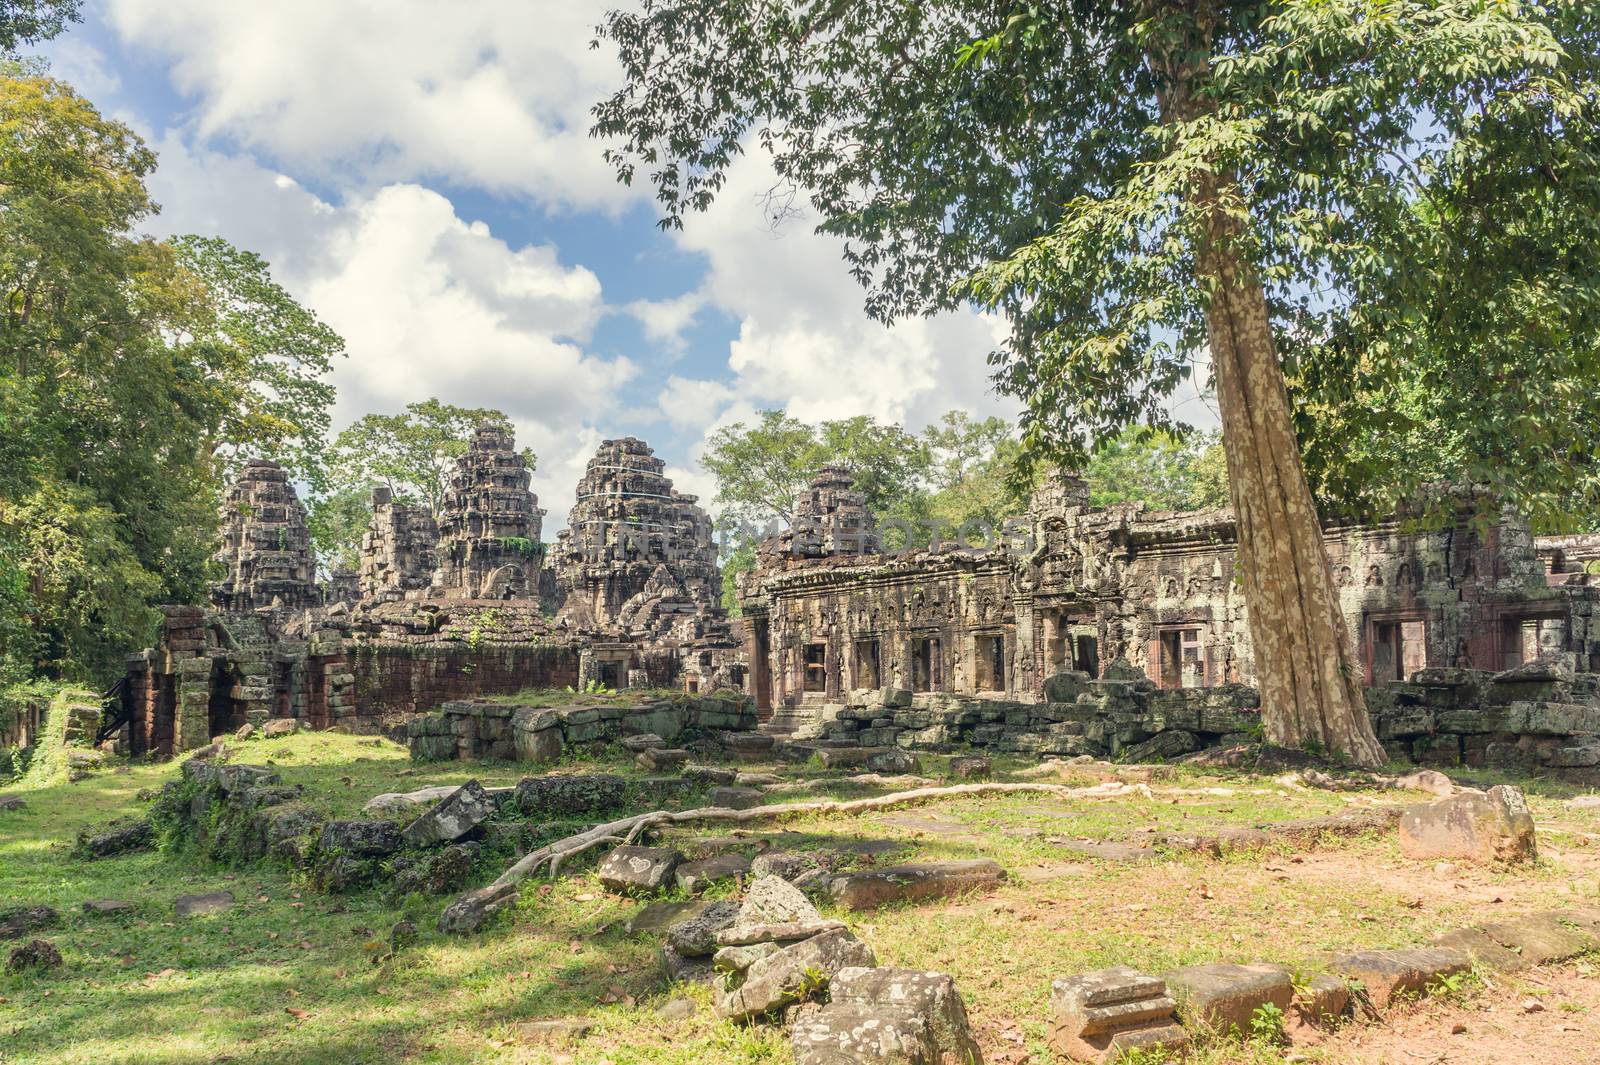 Angkor Wat in Cambodia. Ancient temple complex Banteay Kdei